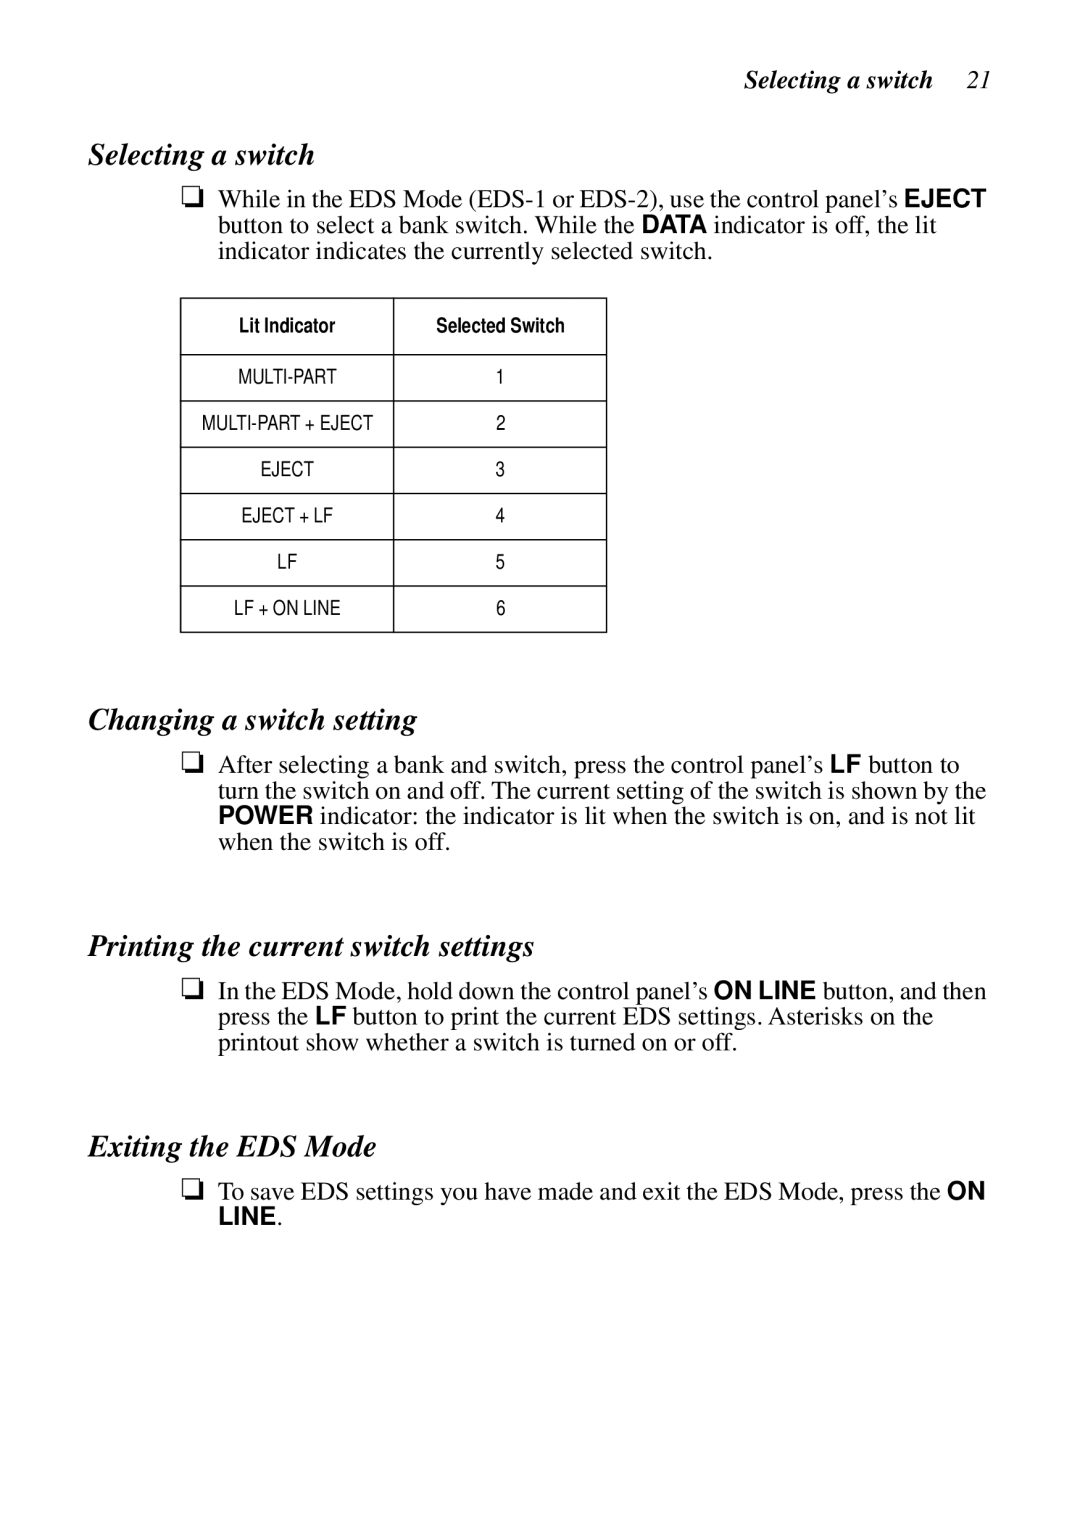 Star Micronics LC-8021 manual Selecting a switch, Changing a switch setting, Printing the current switch settings, Line 